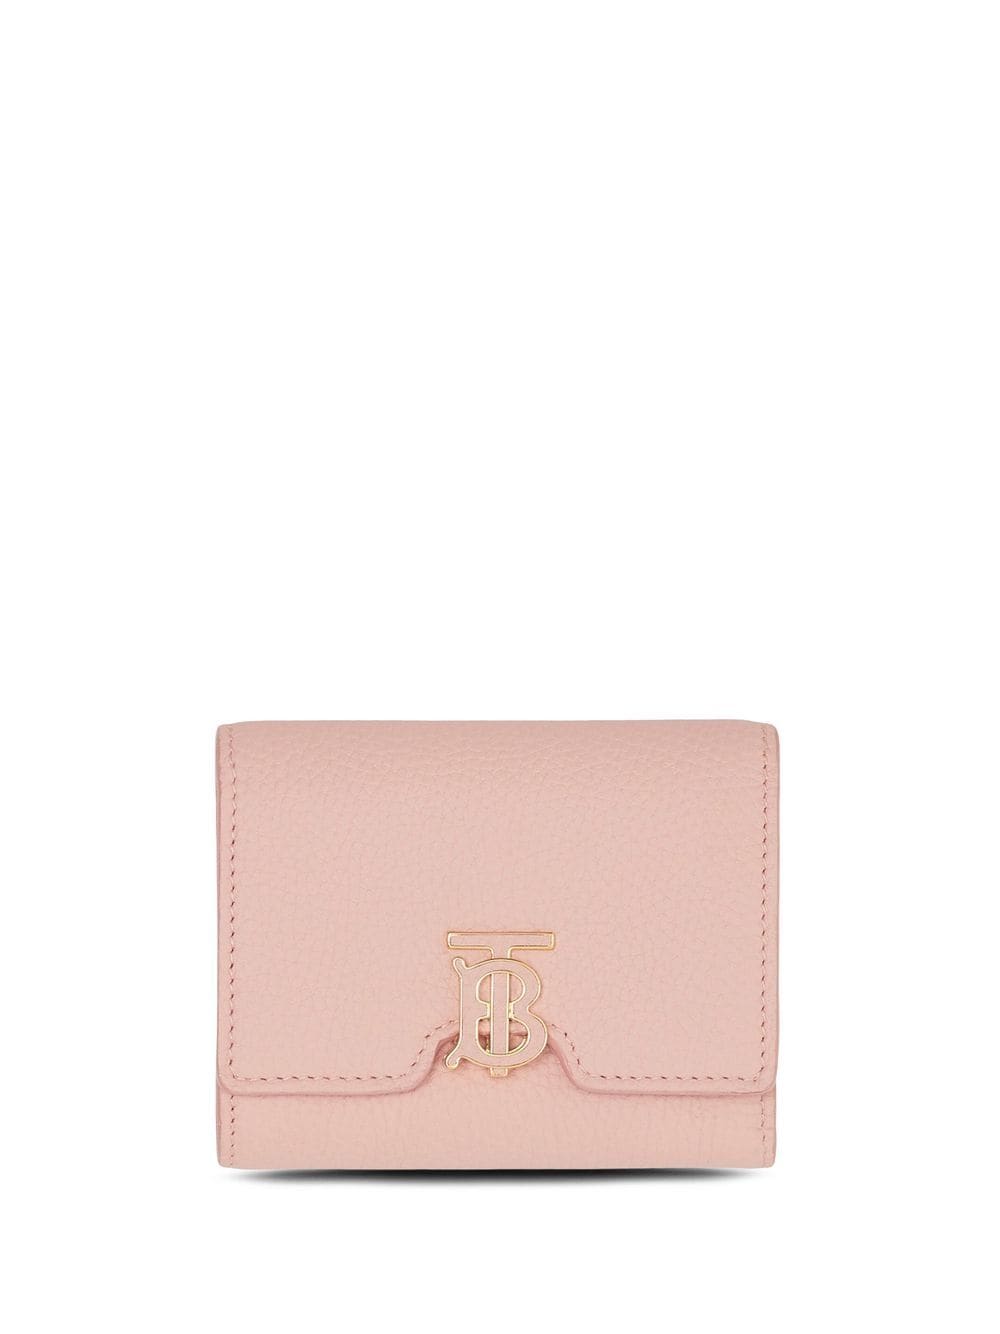 Burberry Grainy Leather Tb Folding Wallet In Pink | ModeSens